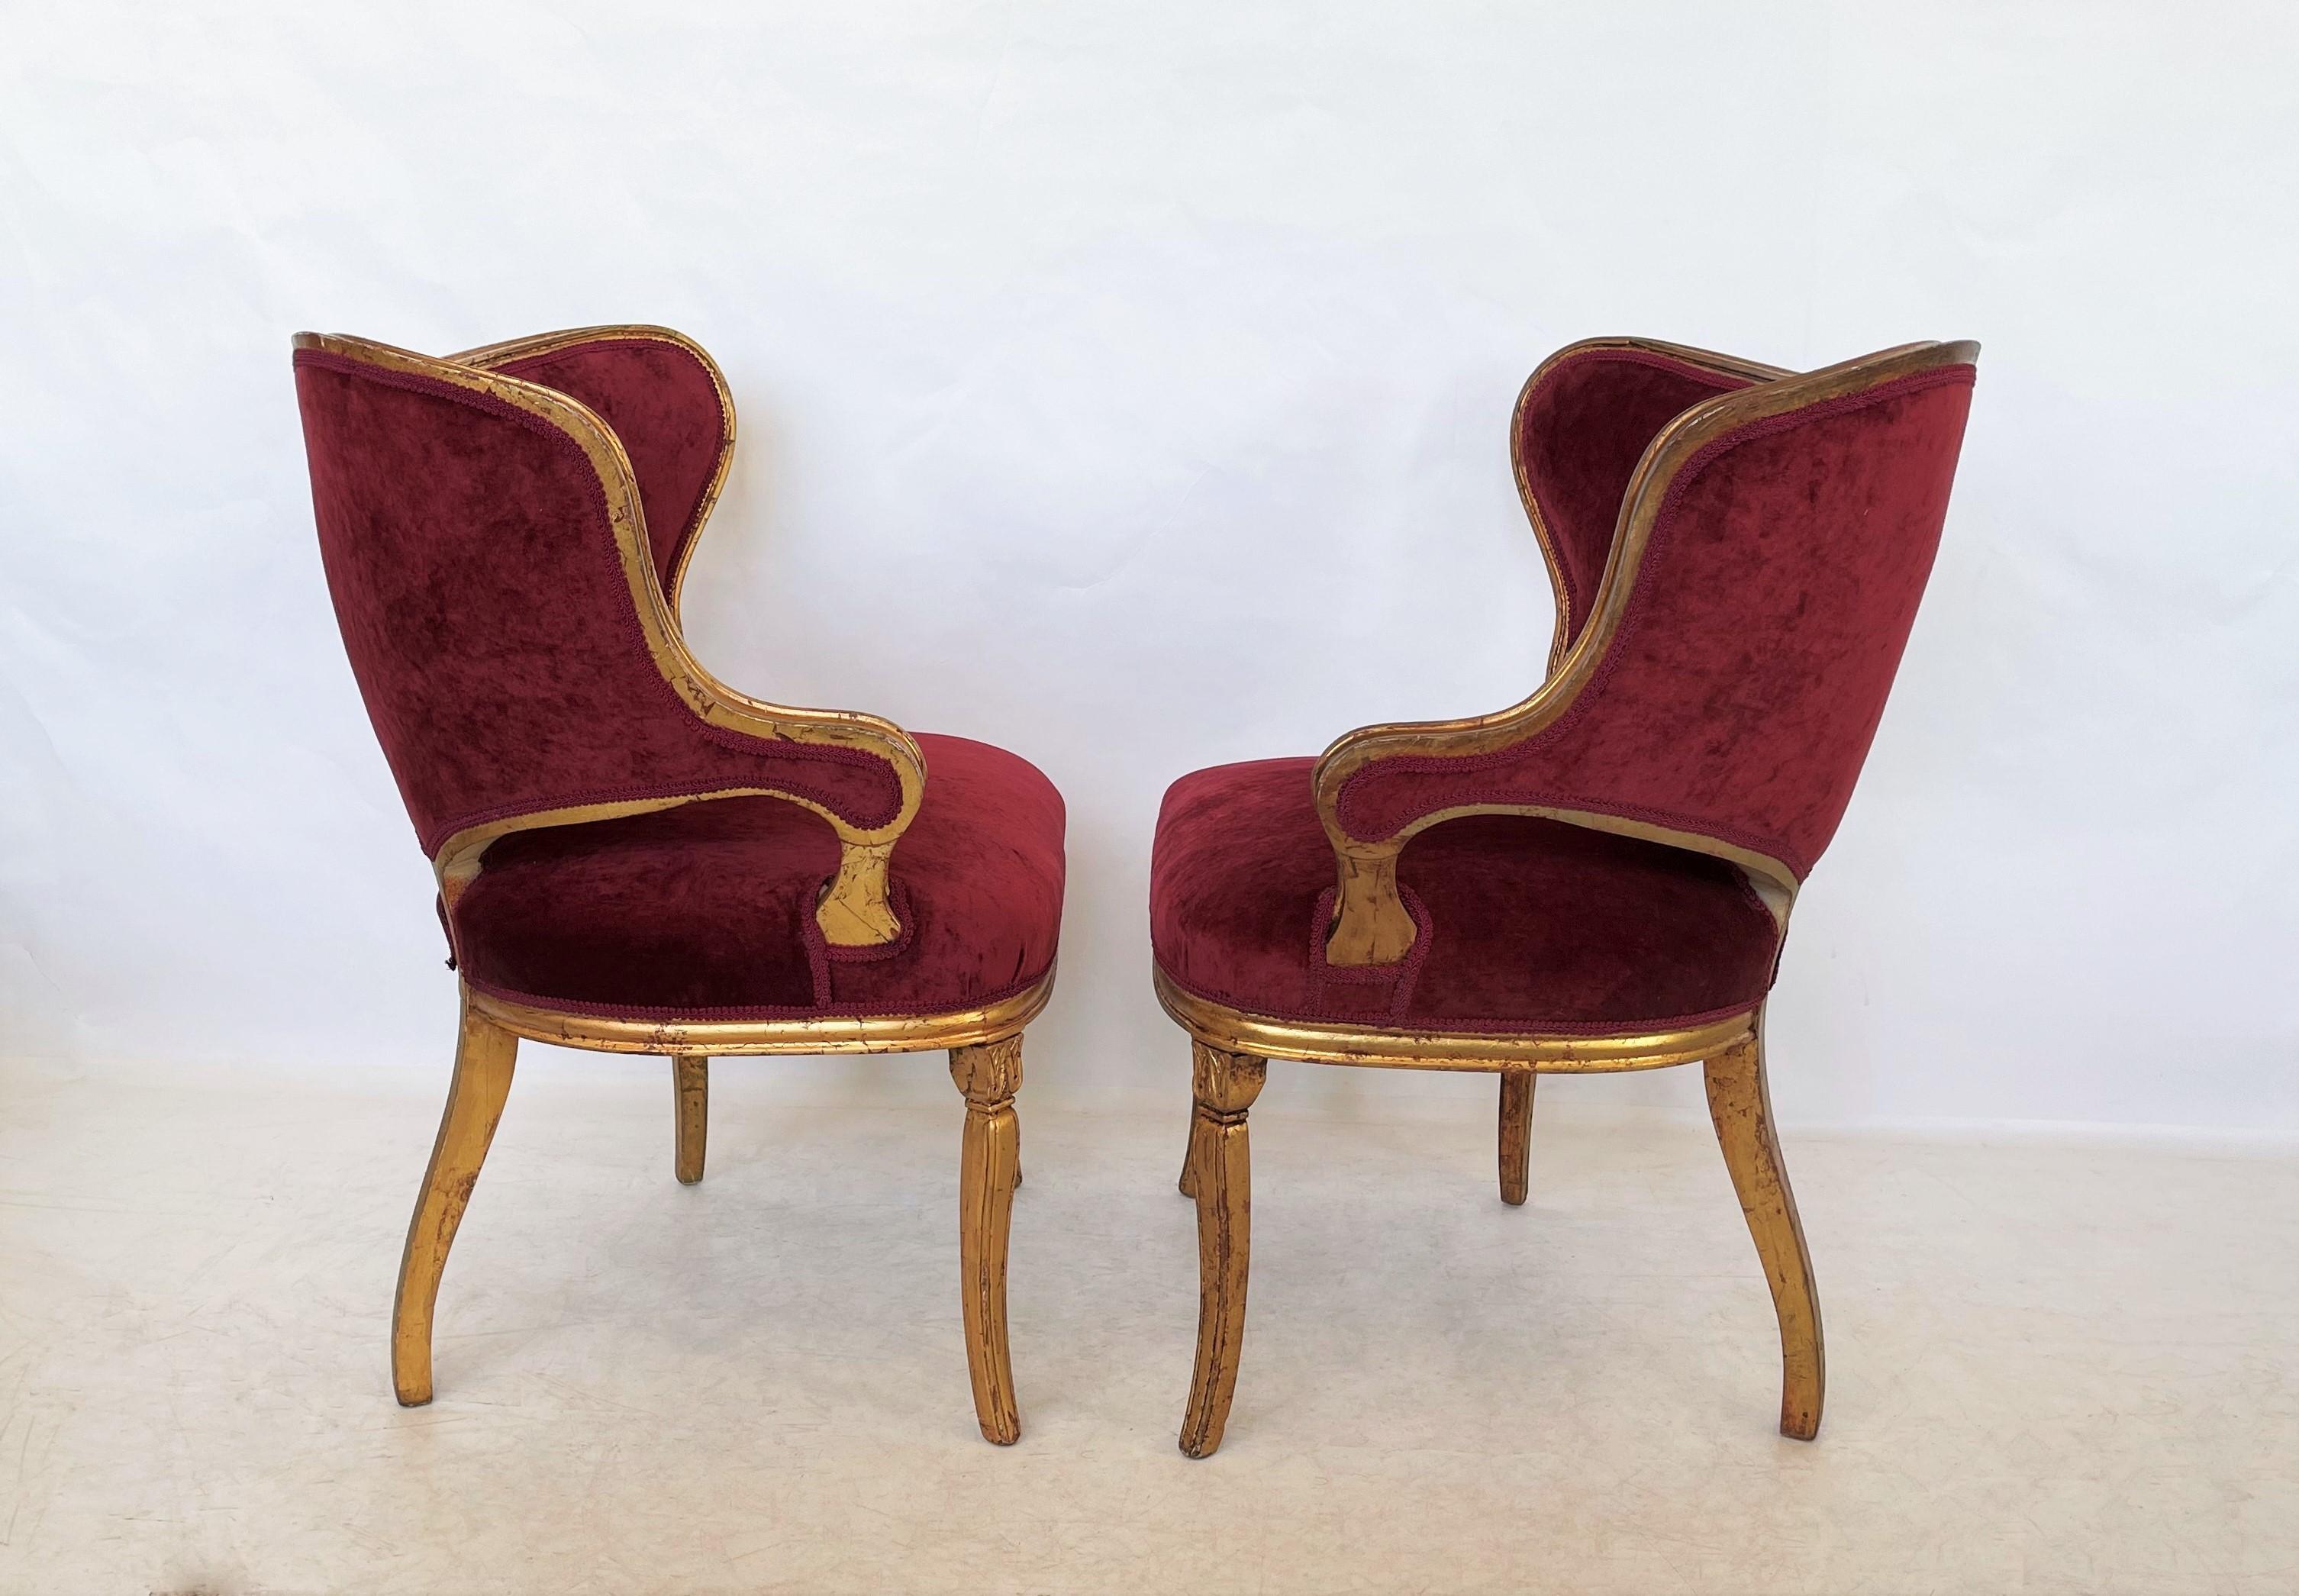 Mid-20th Century Pair of Hollywood Regency Fireside Chairs Attributed to Grosfeld House For Sale